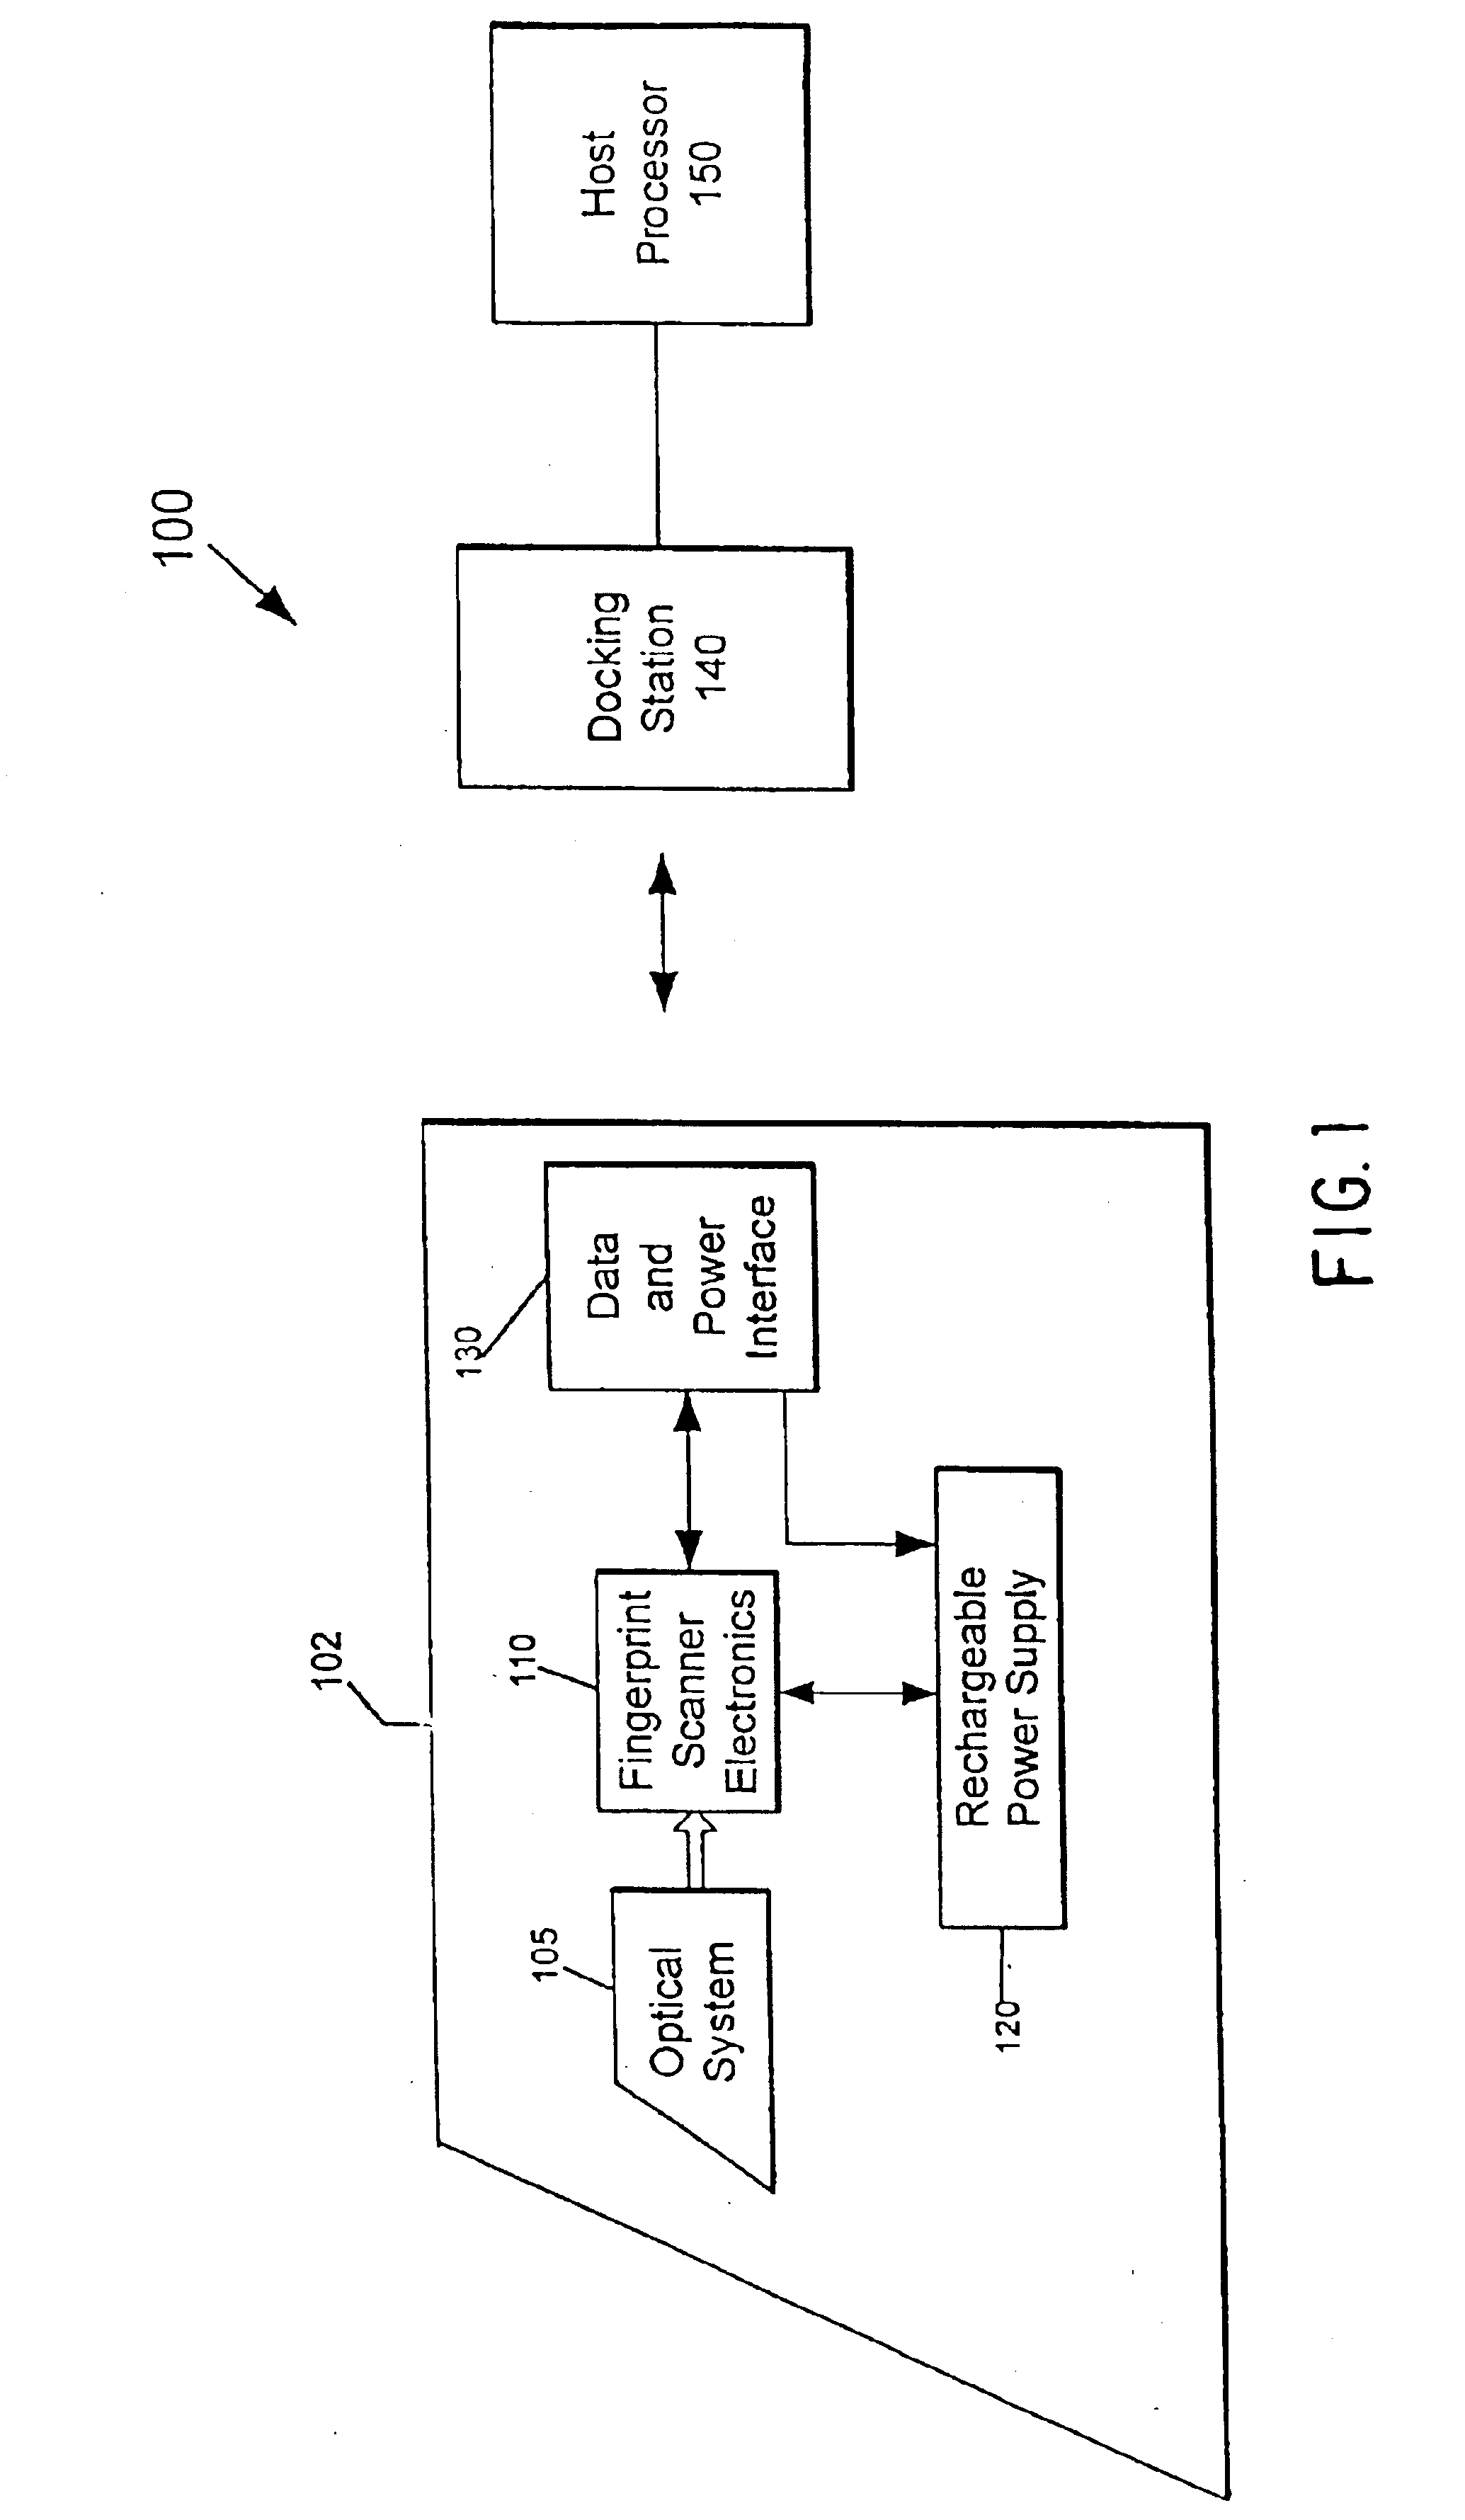 Rechargeable mobile hand-held fingerprint scanner with a data and power communication interface